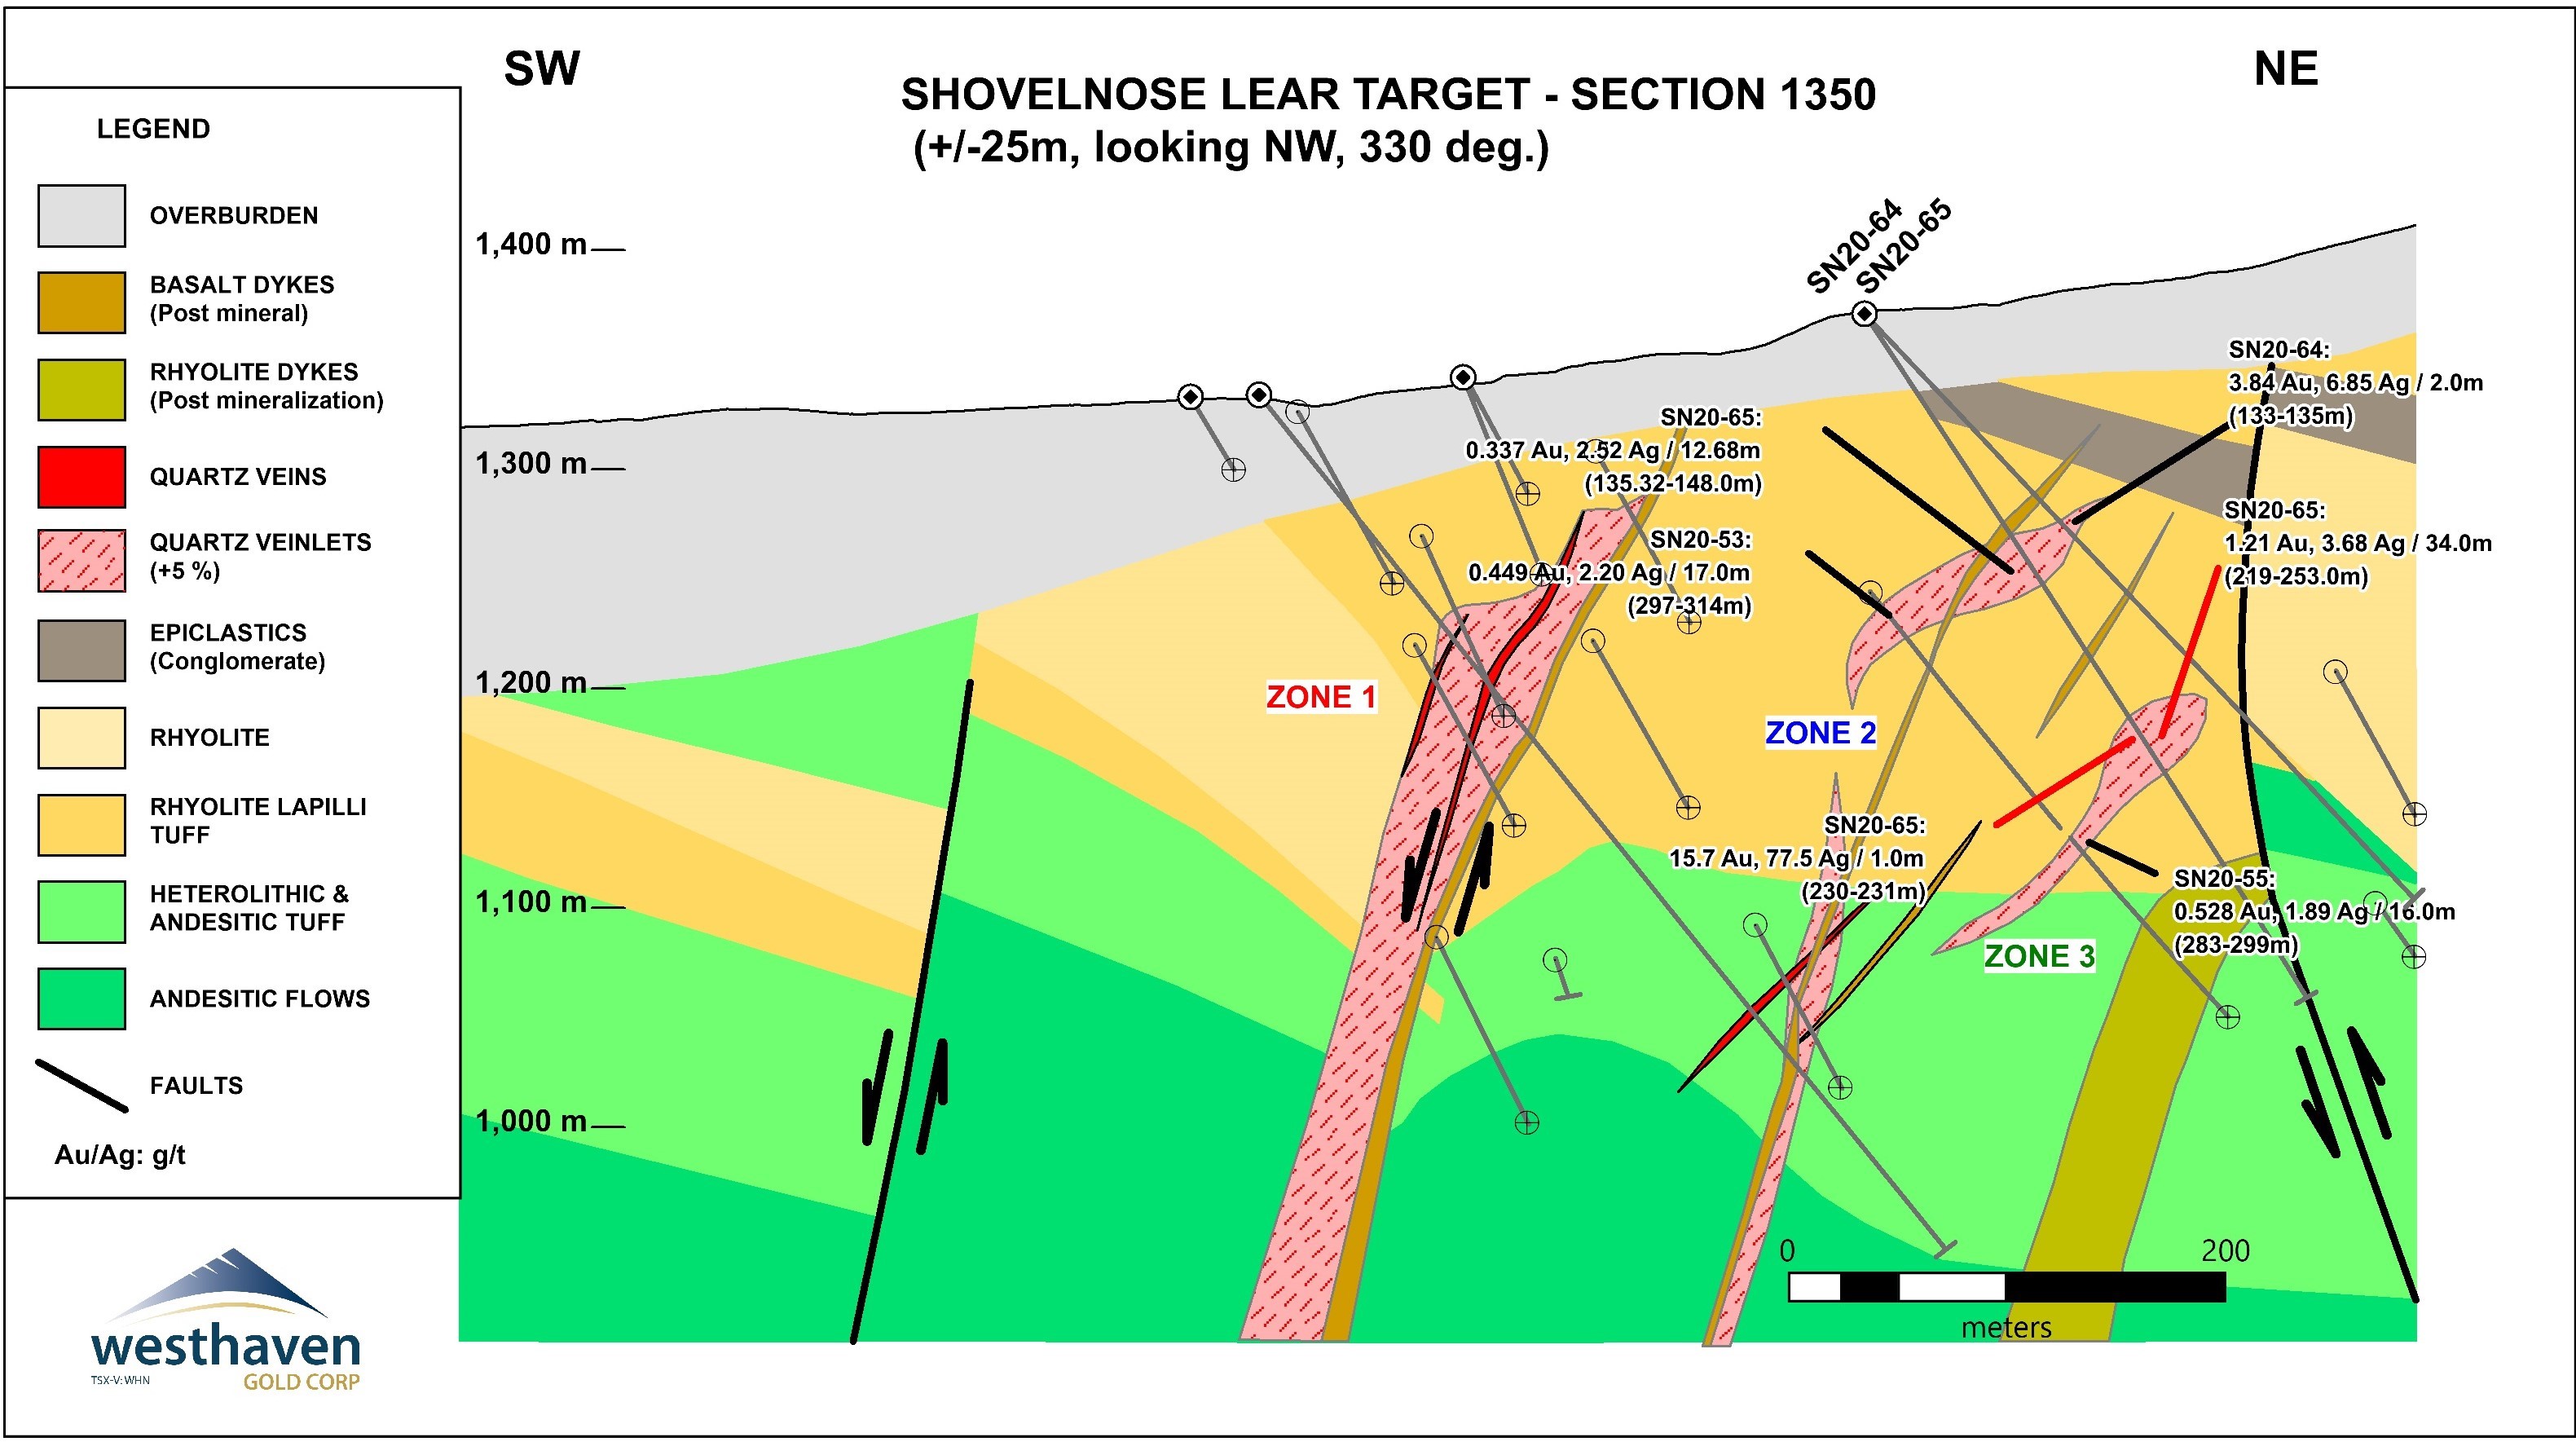 Shovelnose Lear Target - Section 1350 (+/-25m, looking NW, 330 deg.)